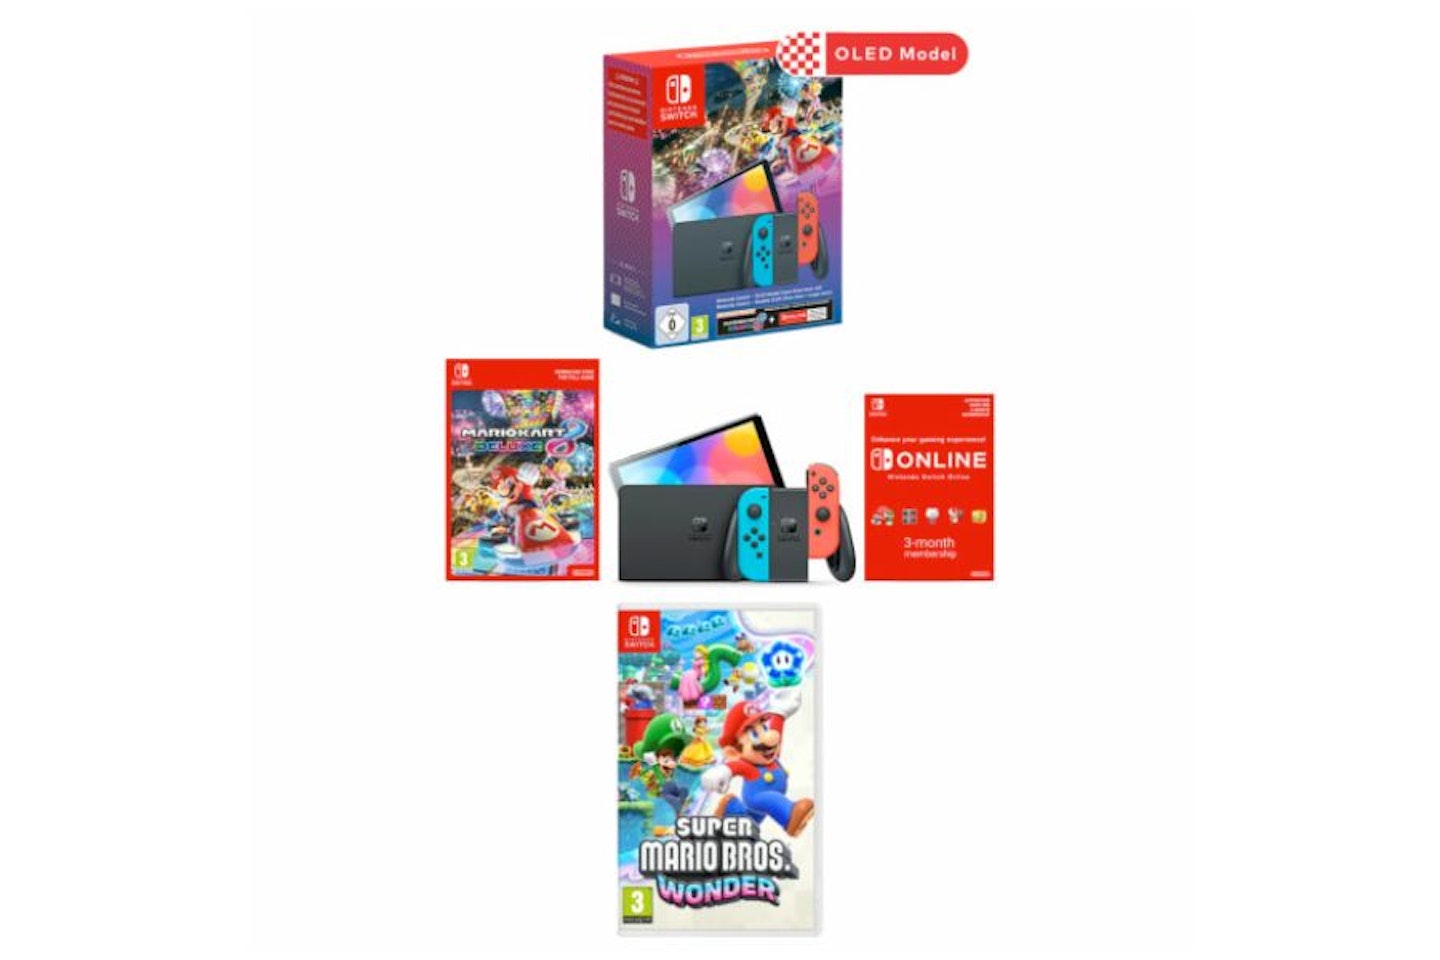 Nintendo Switch OLED with Mario Kart 8 Deluxe, Super Mario Bros. Wonder and Switch Online Bundle 